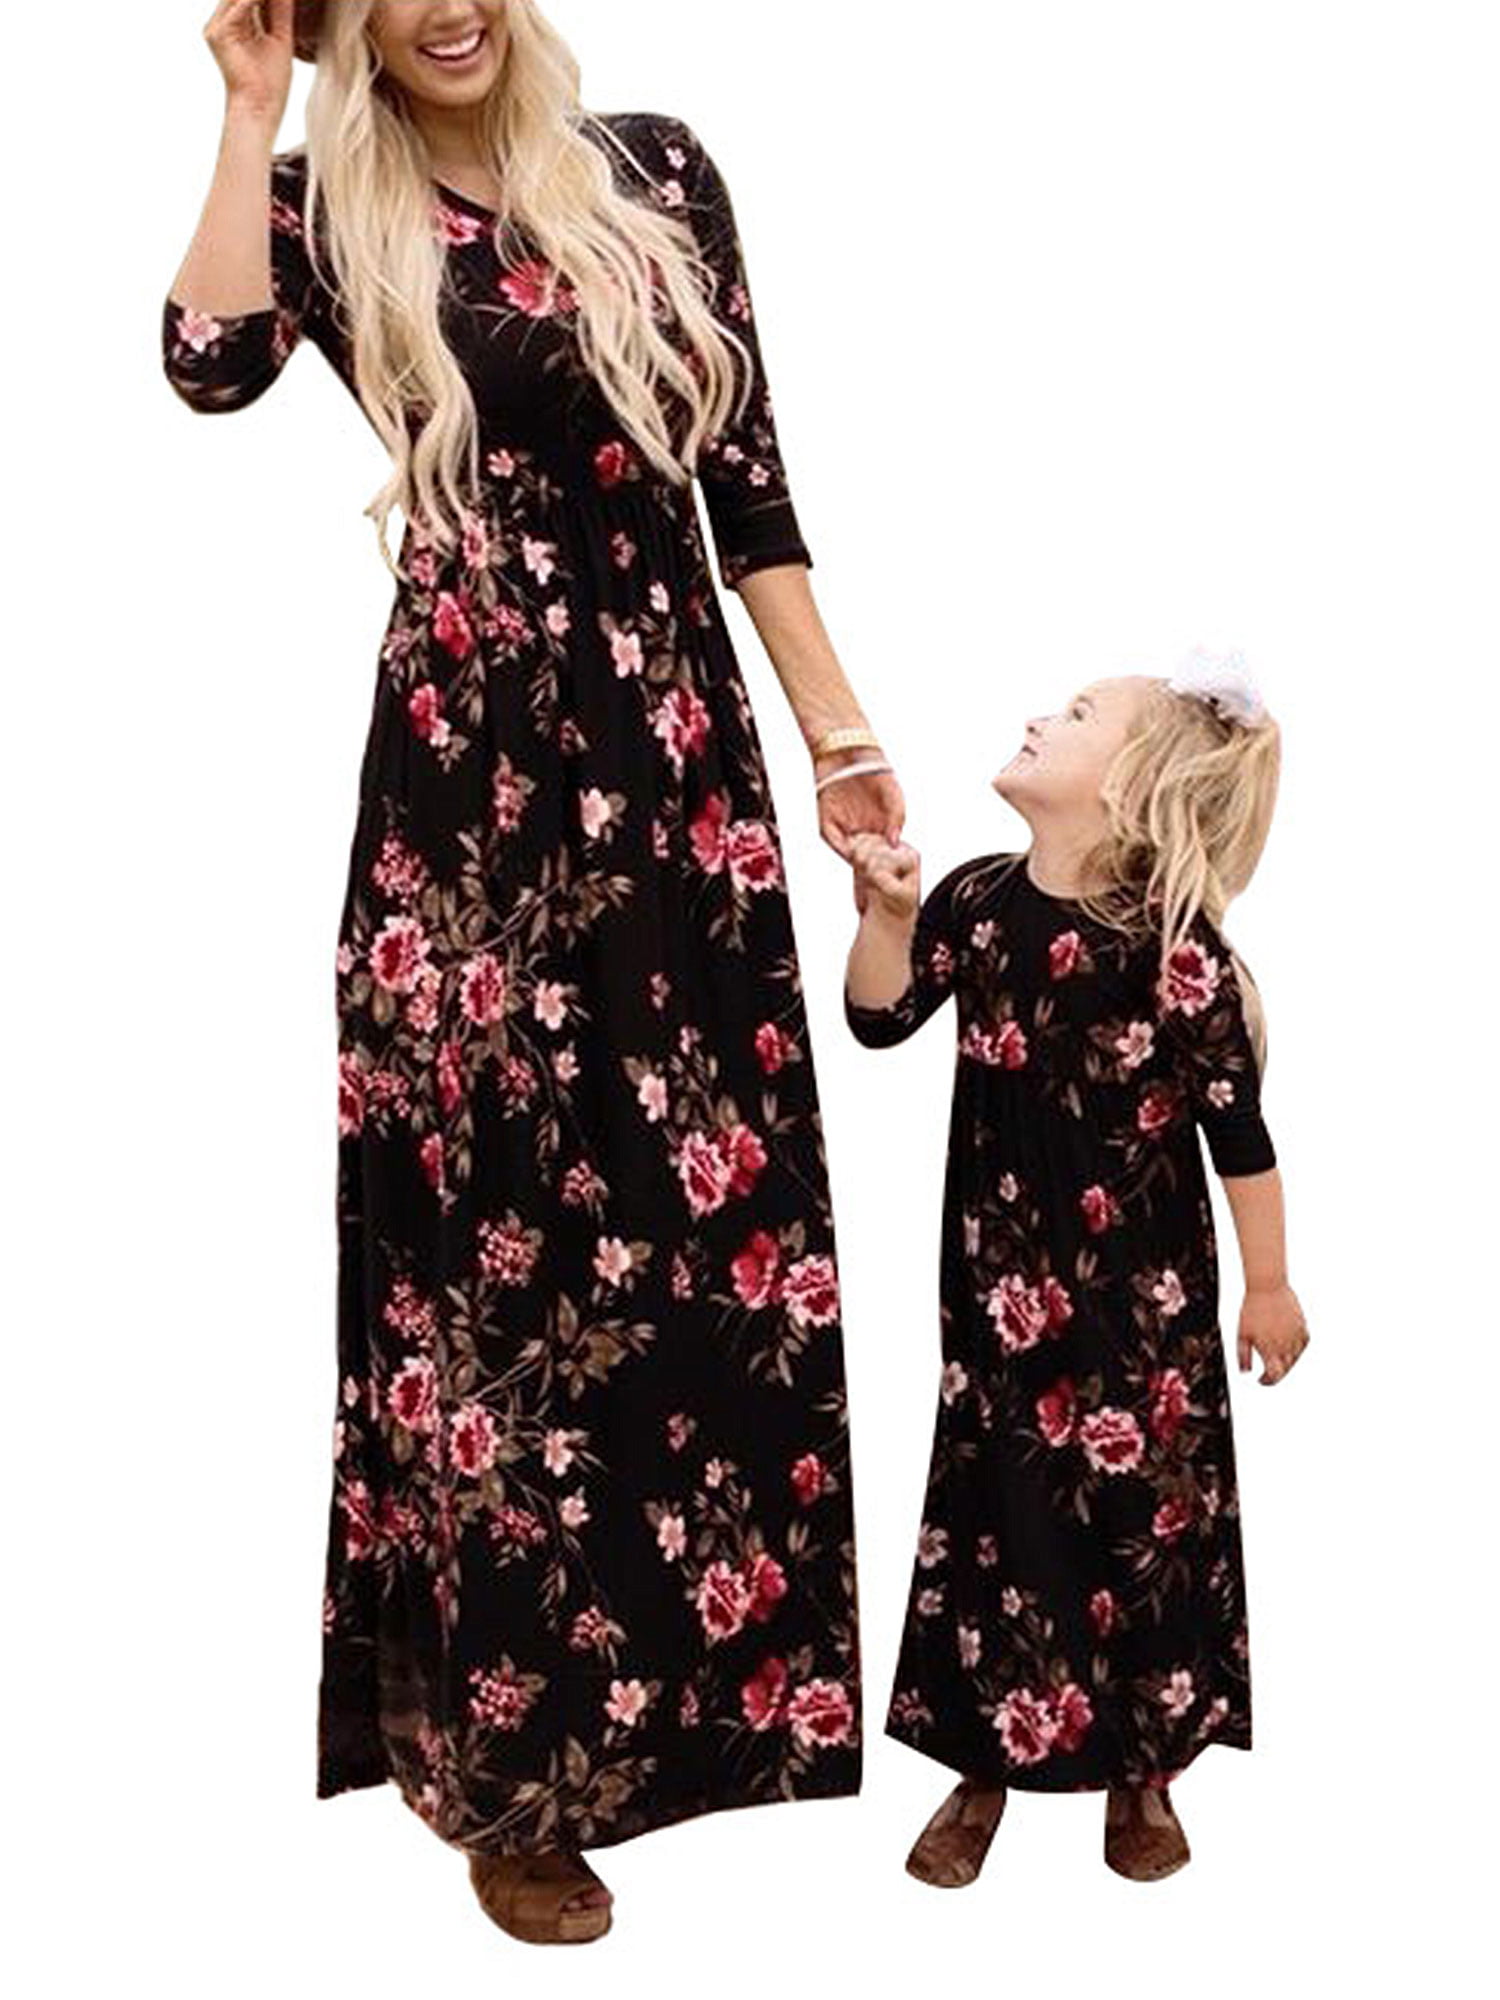 Mother Daughter Casual Boho Long Maxi Dress Mom & Kid Matching Outfit Clothes 